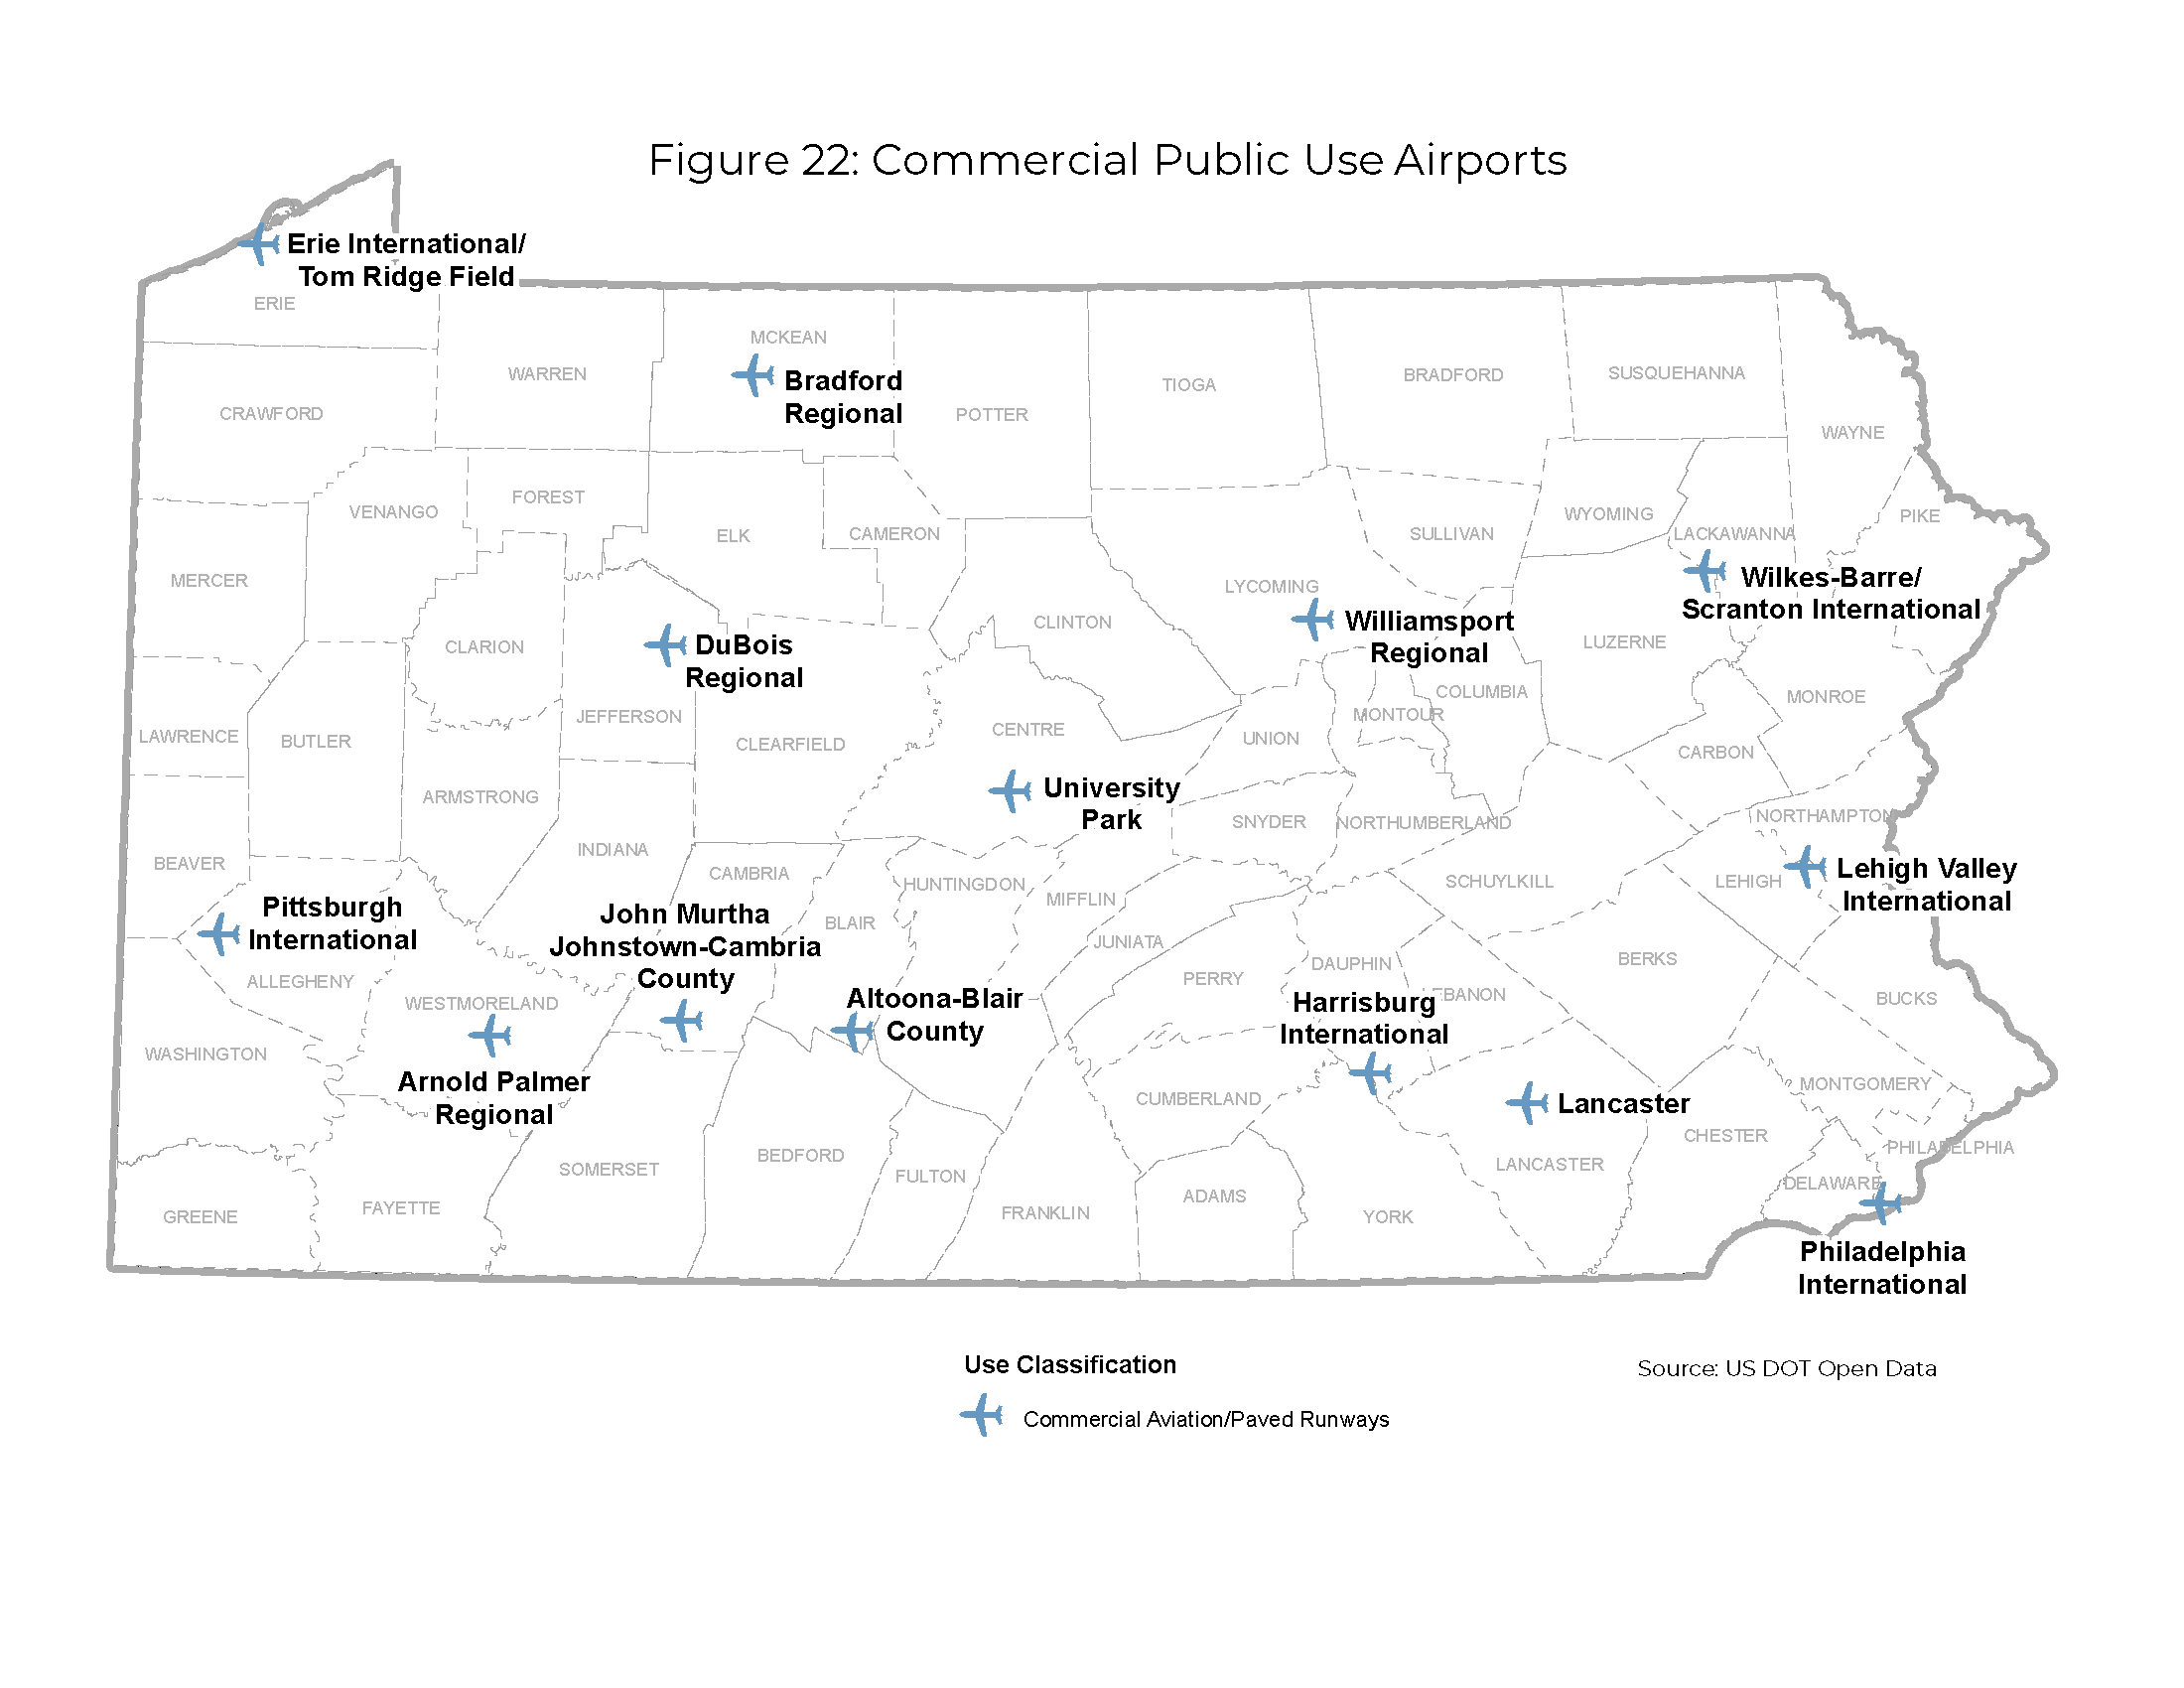 Pennsylvania map showing the 14 Commercial Aviation/Paved Runway airports across the state.